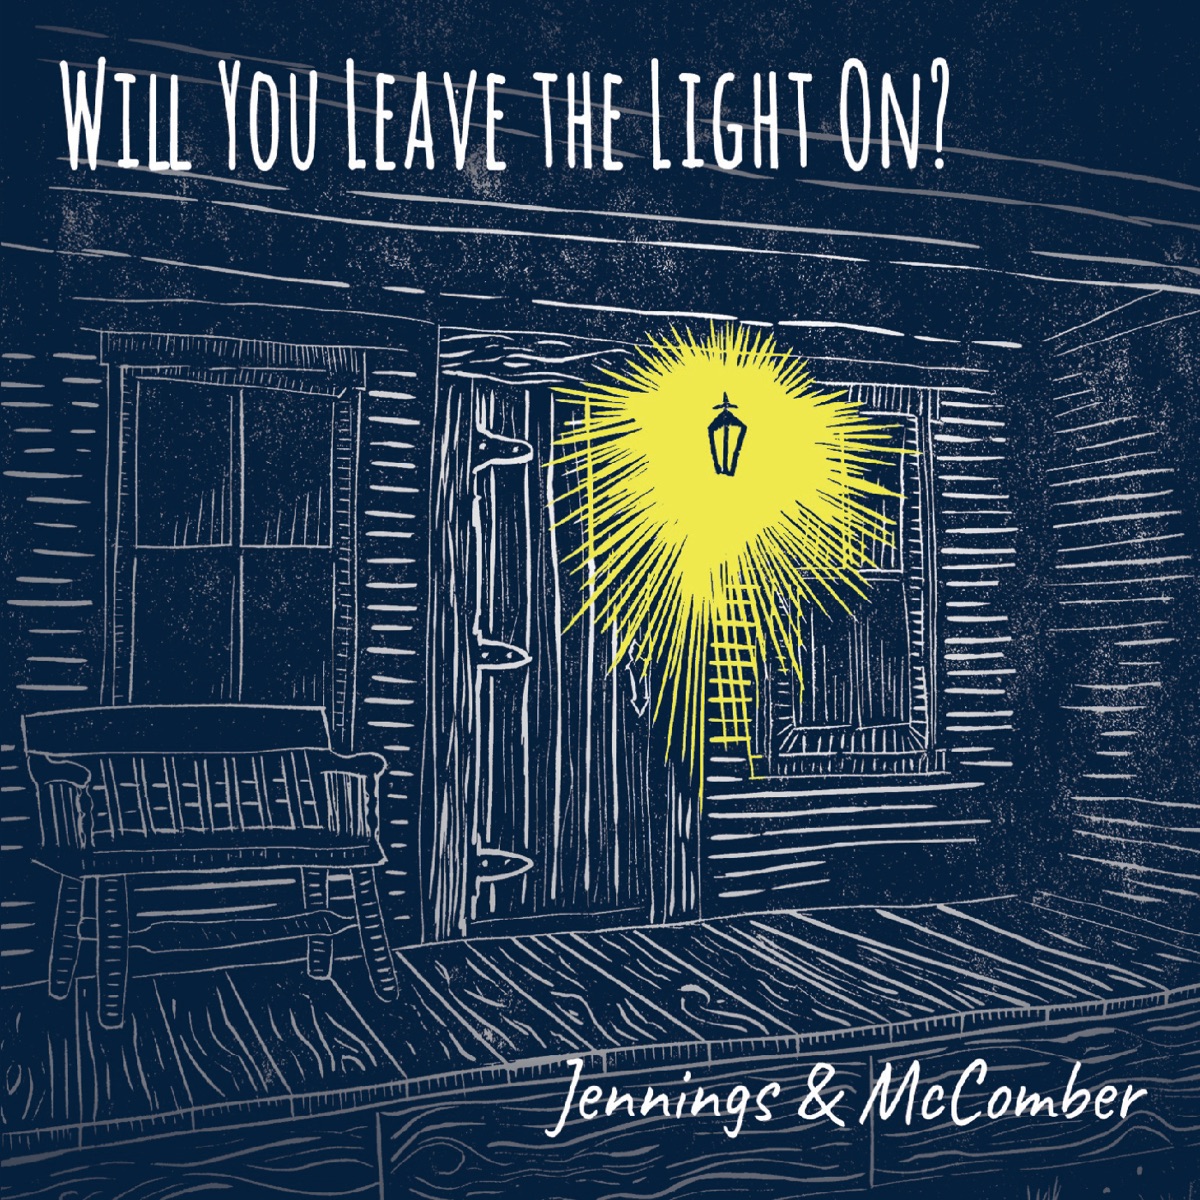 Will You Leave the Light On? by Jennings & McComber on Apple Music